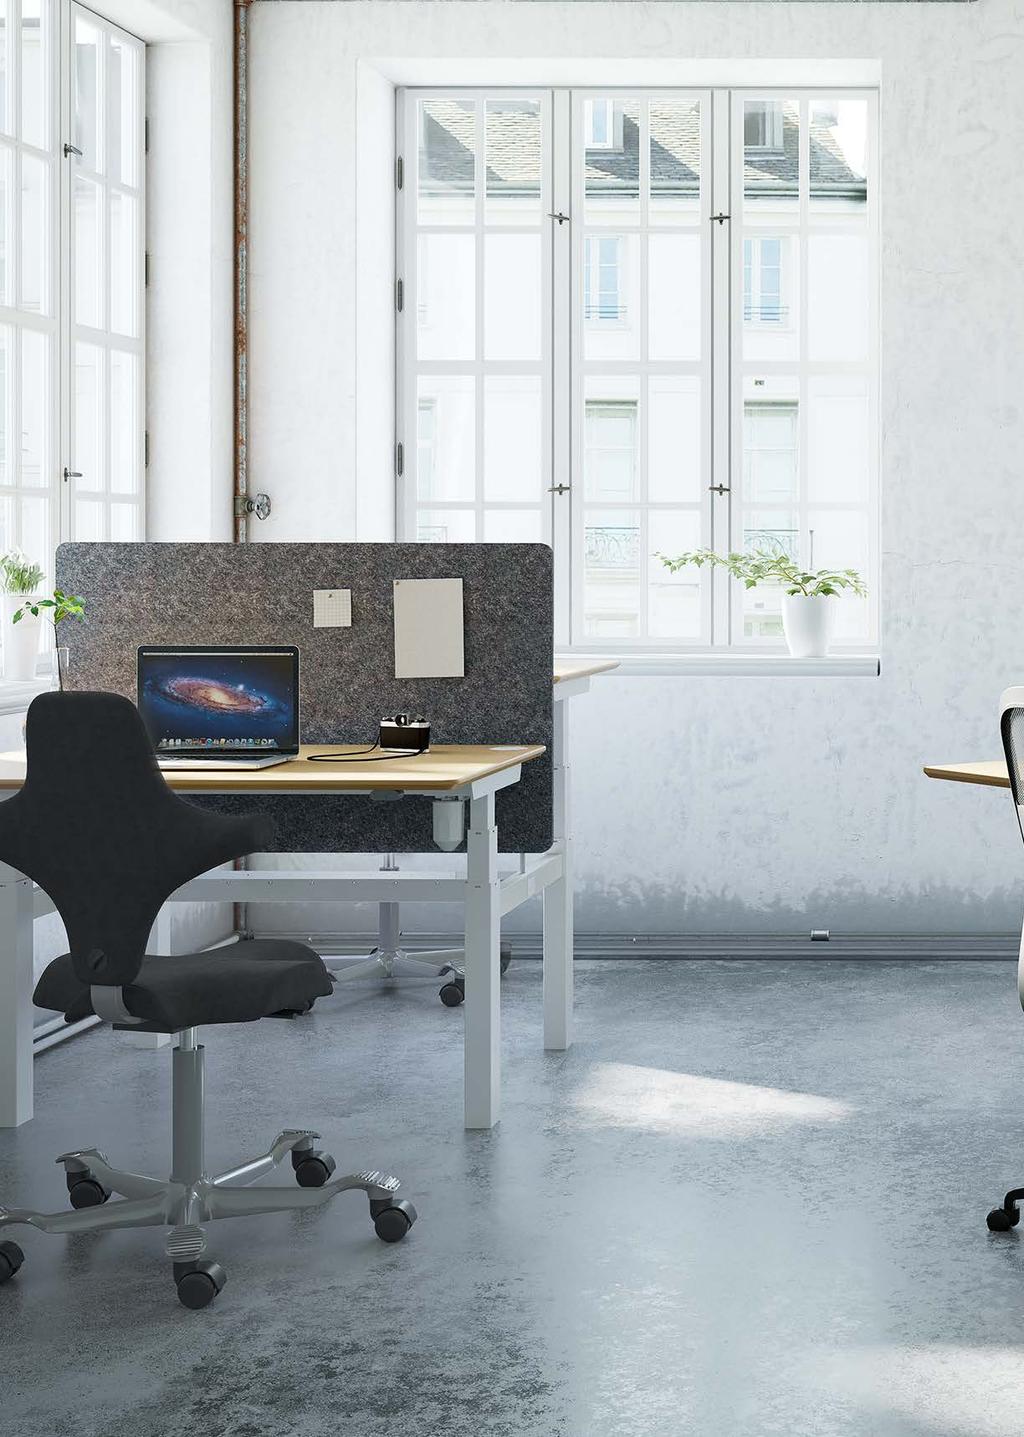 501-88 501-88 Functionality and modern design The bench 501-88 is very suitable for large office environments and the design makes it easy to seperate the desks from each other with a partition